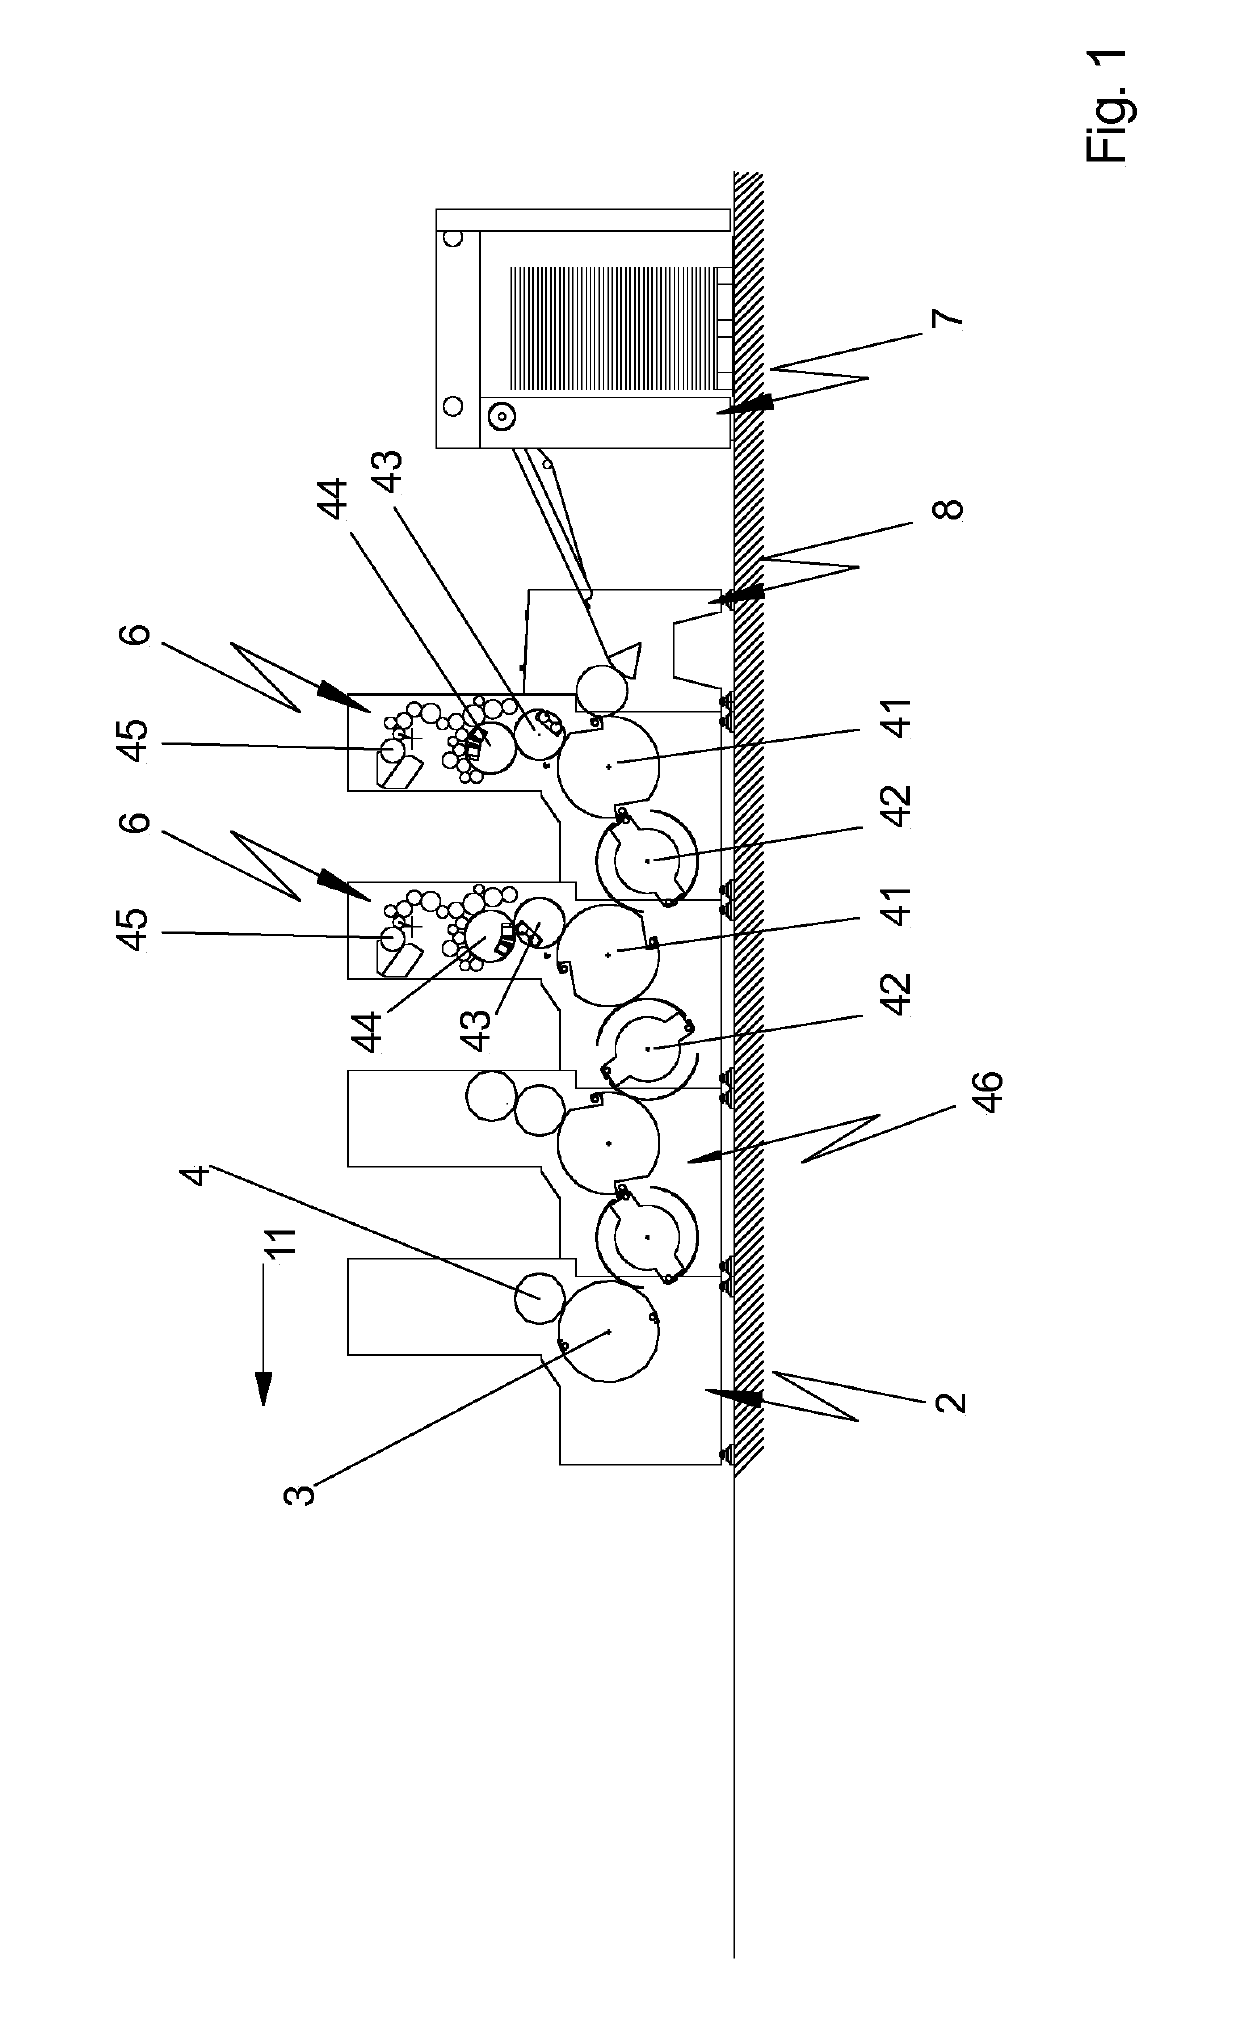 Device for treating substrates